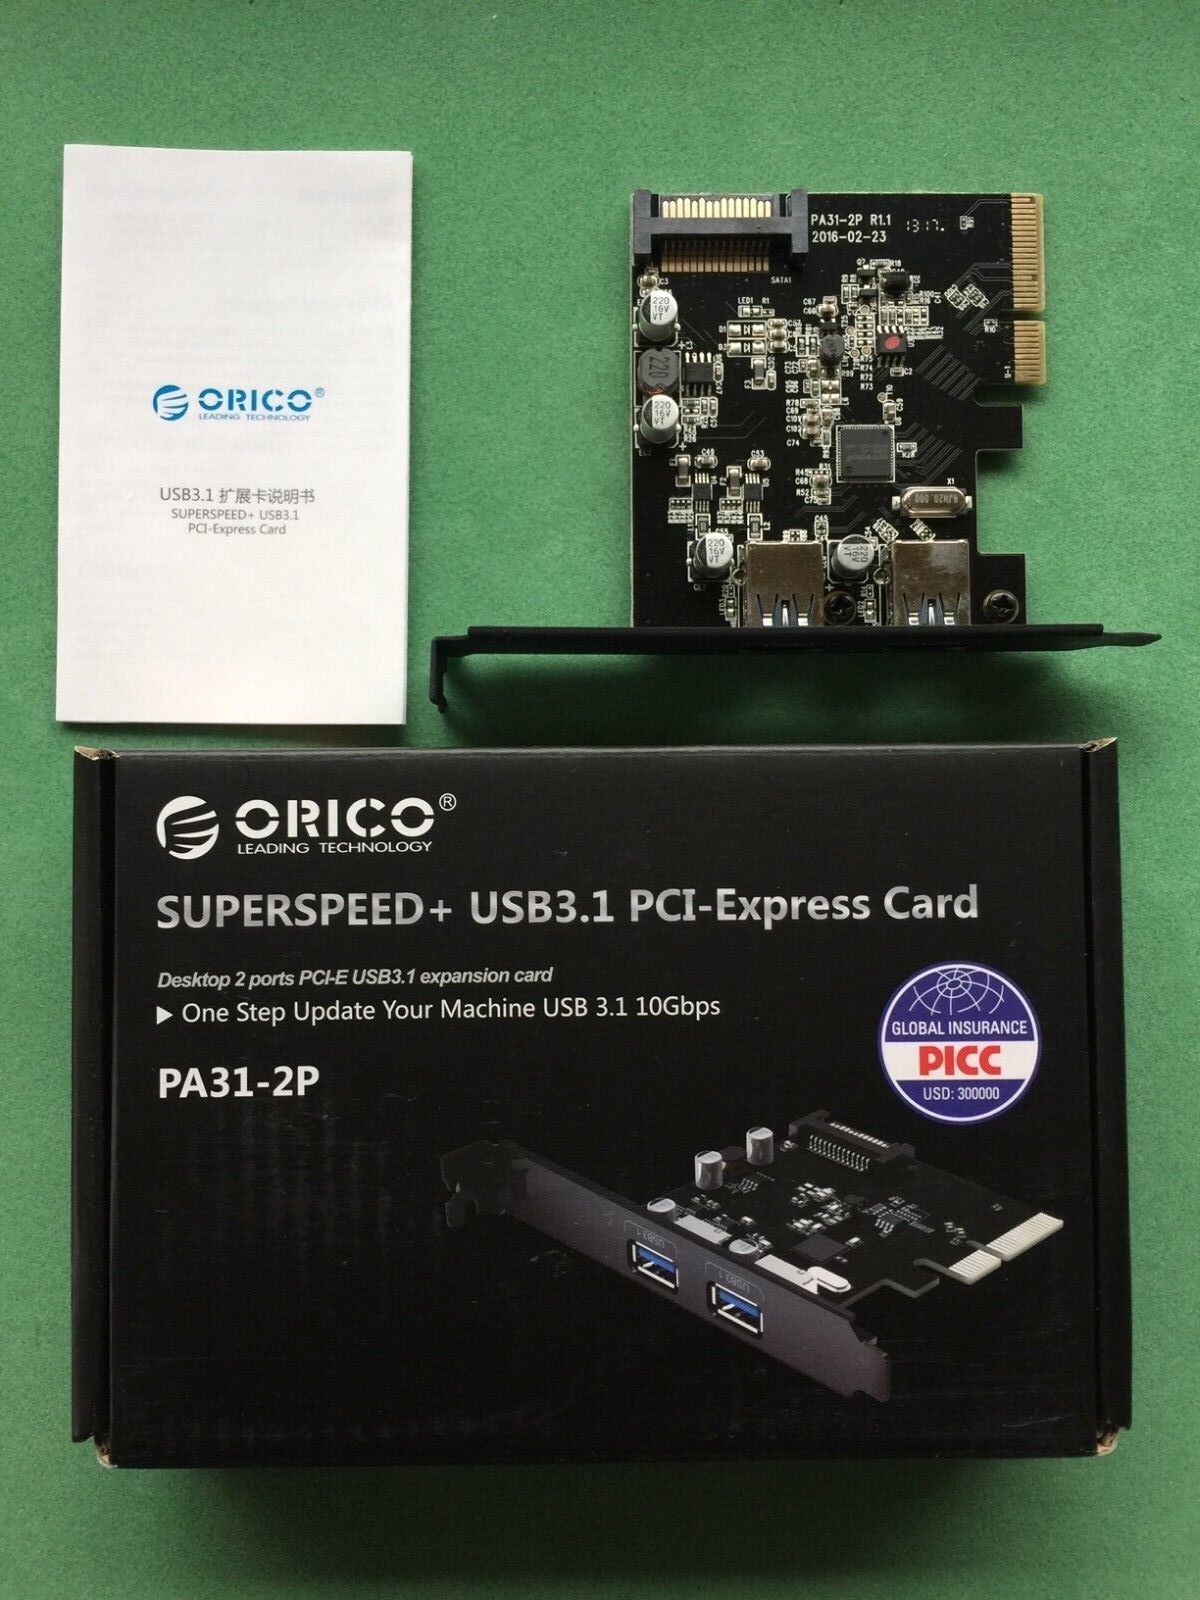 ORICO Superspeed+ USB3.1 PCI-Express Card 10Gbps